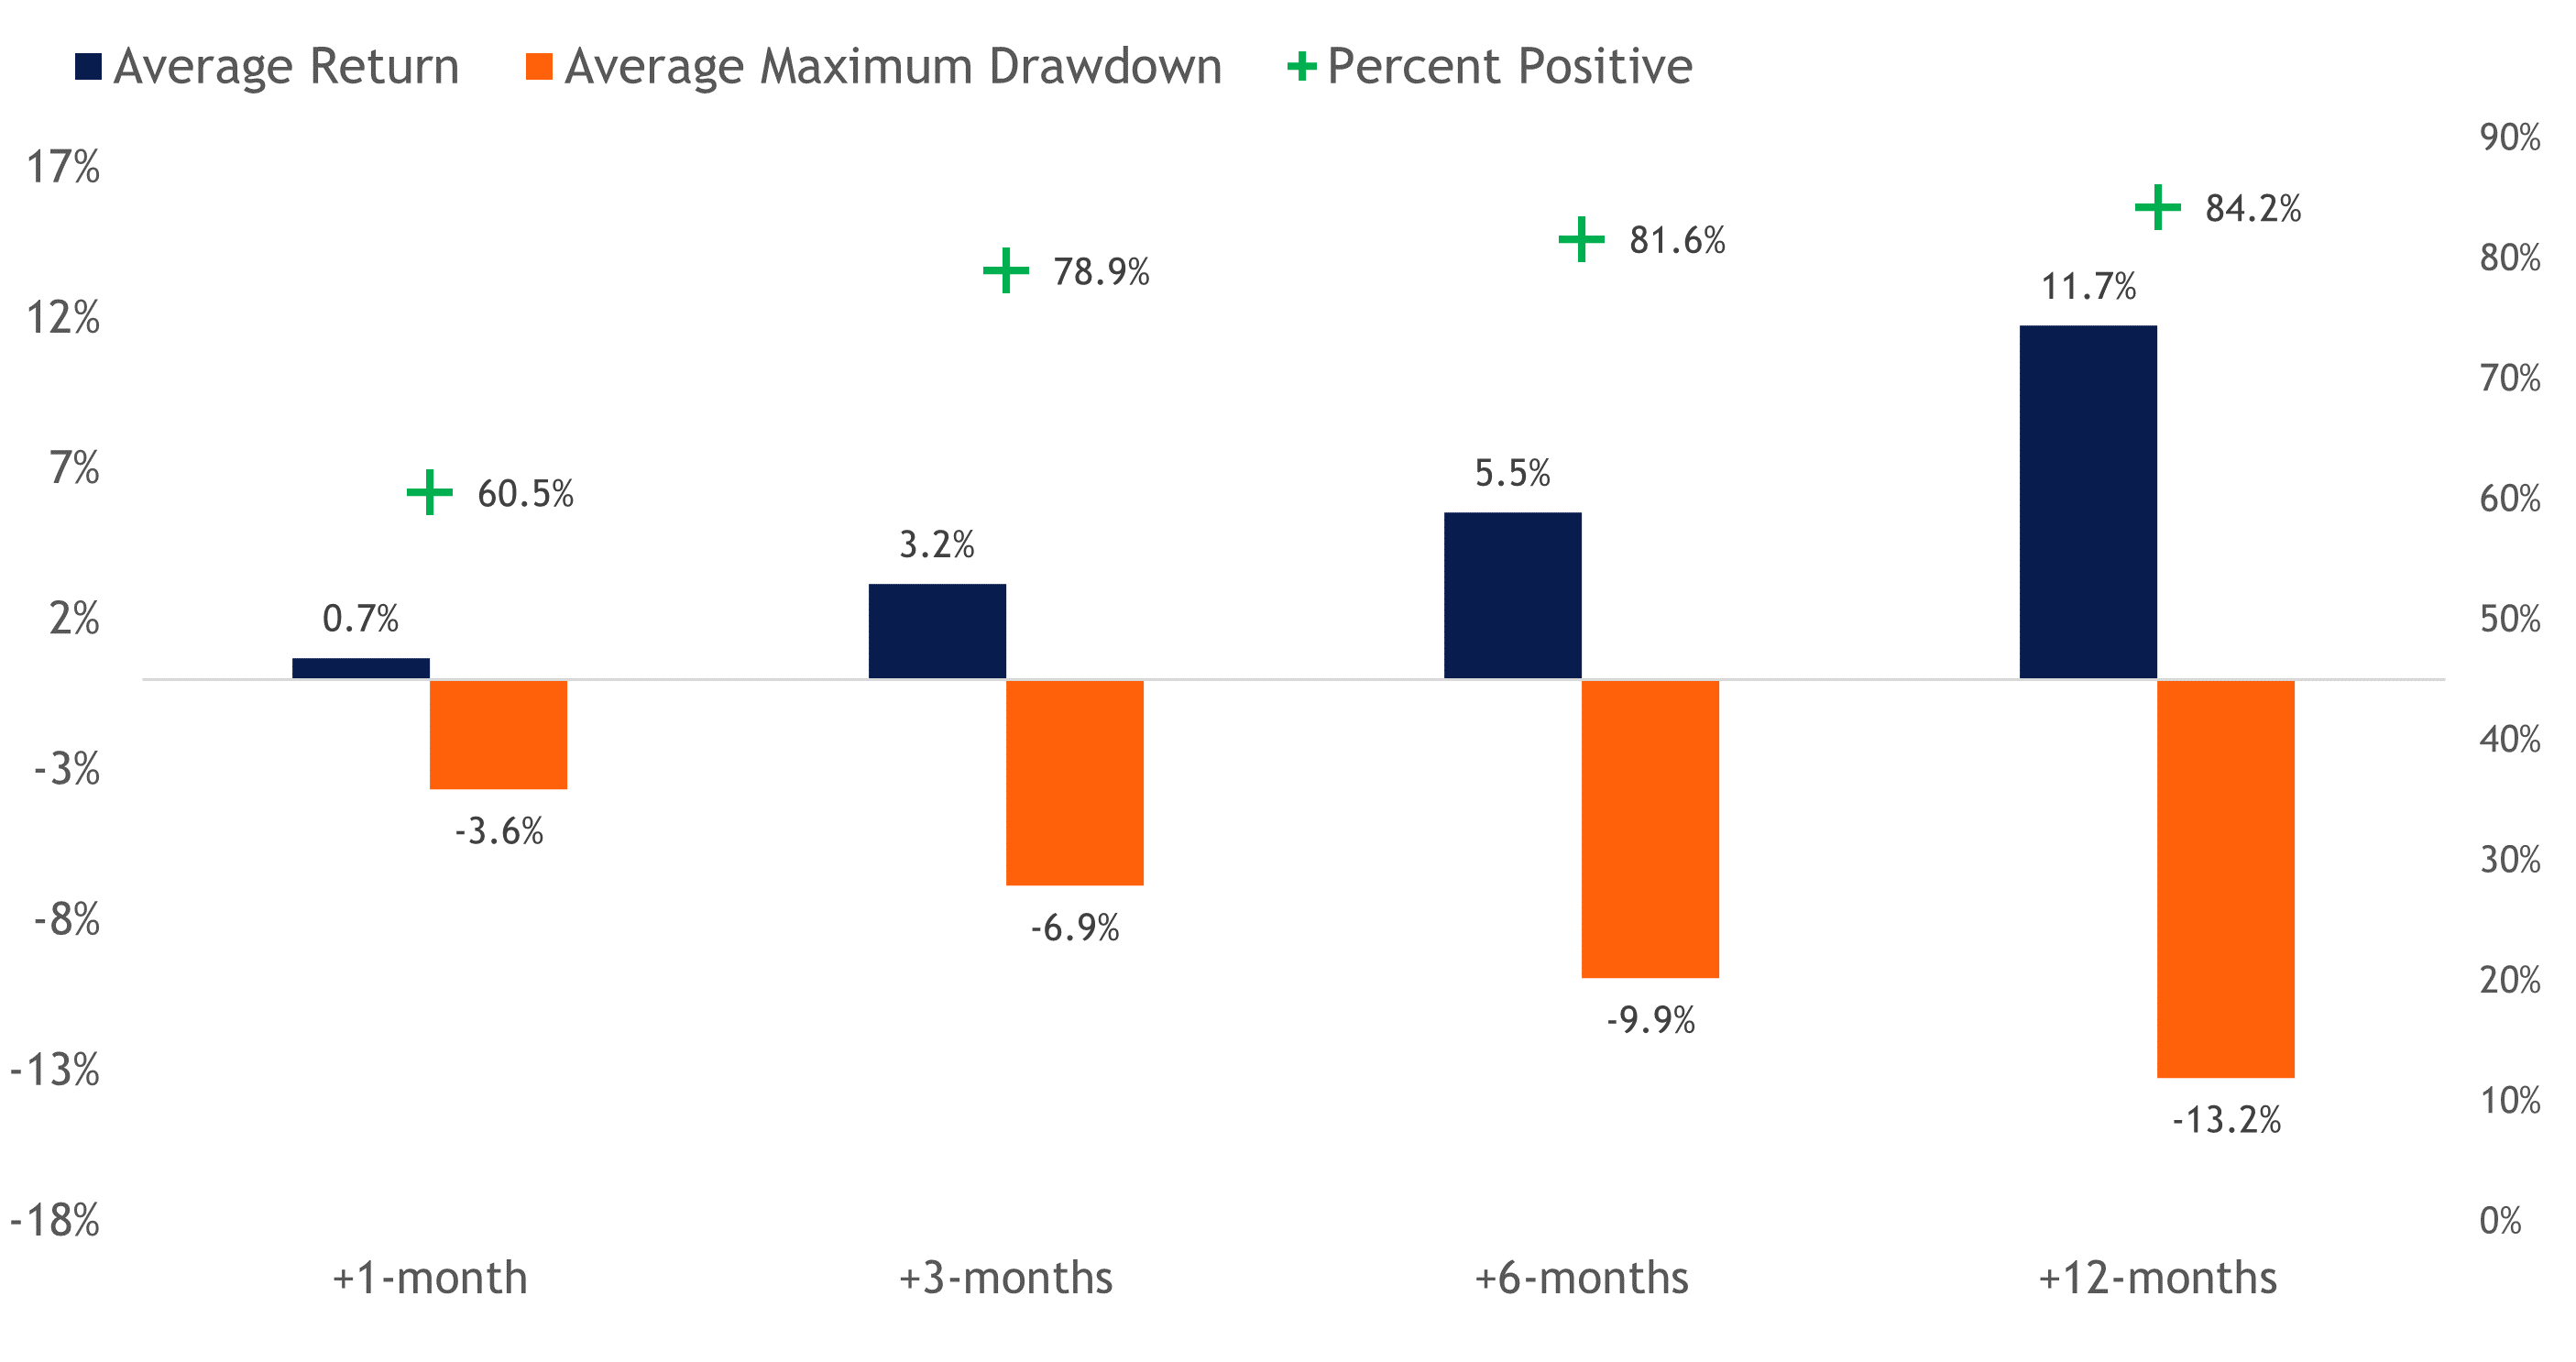 Chart depicting the average return, average maximum drawdown, and percent positive for different time periods.